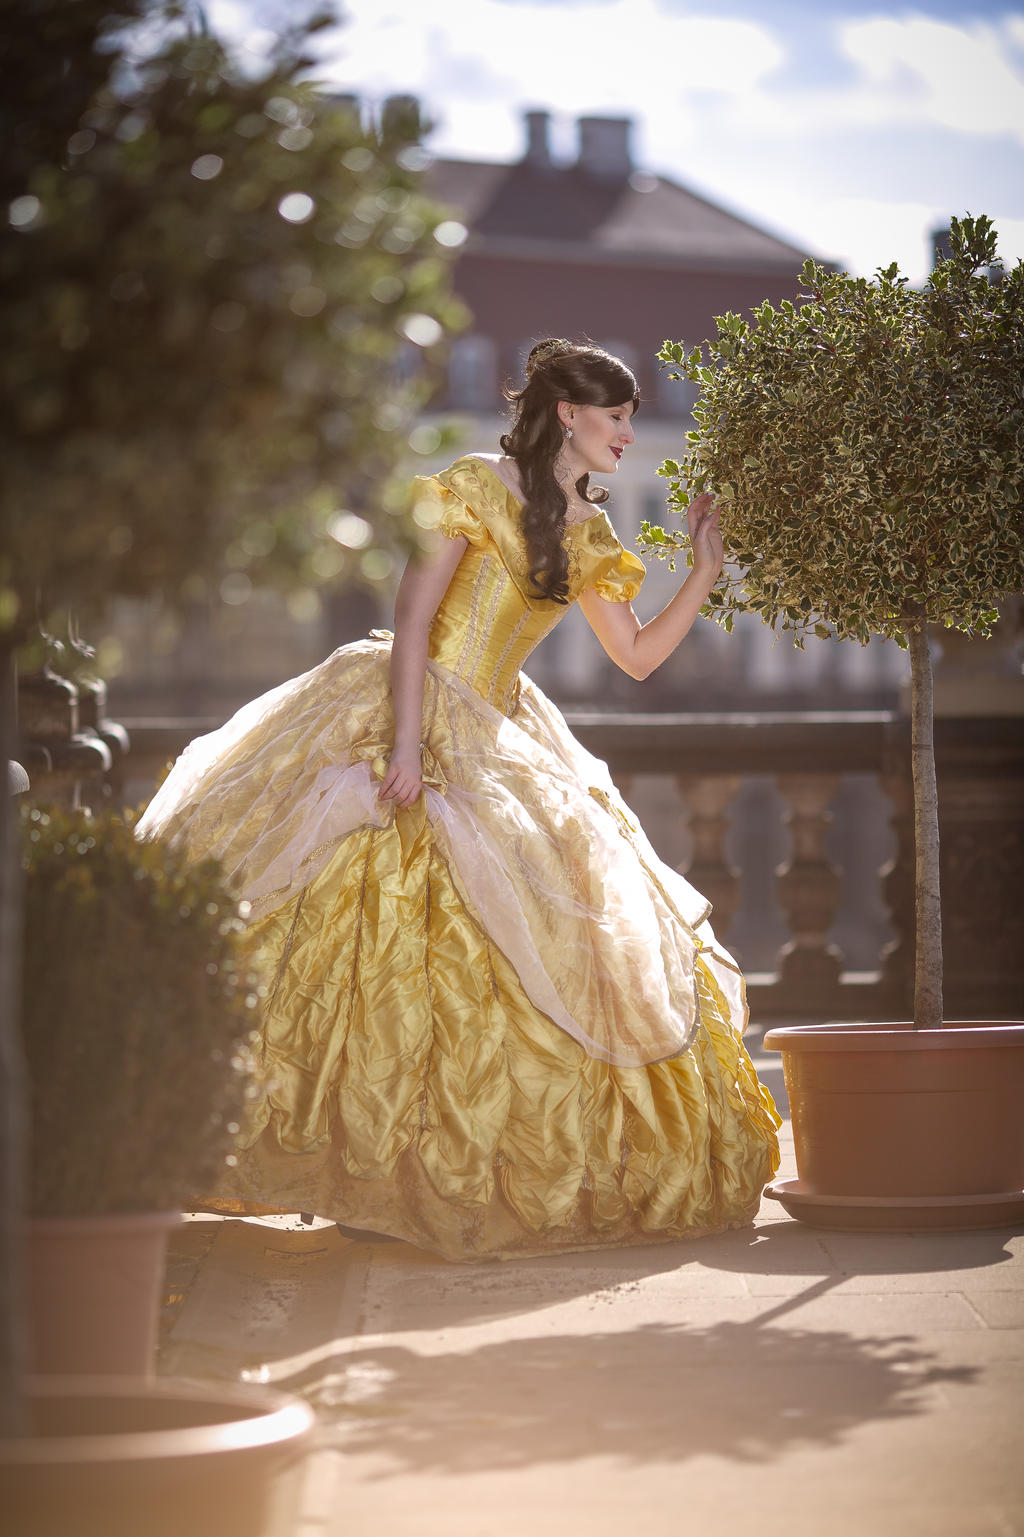 Belle Beauty and the Beast by Shira-Cosplay on DeviantArt